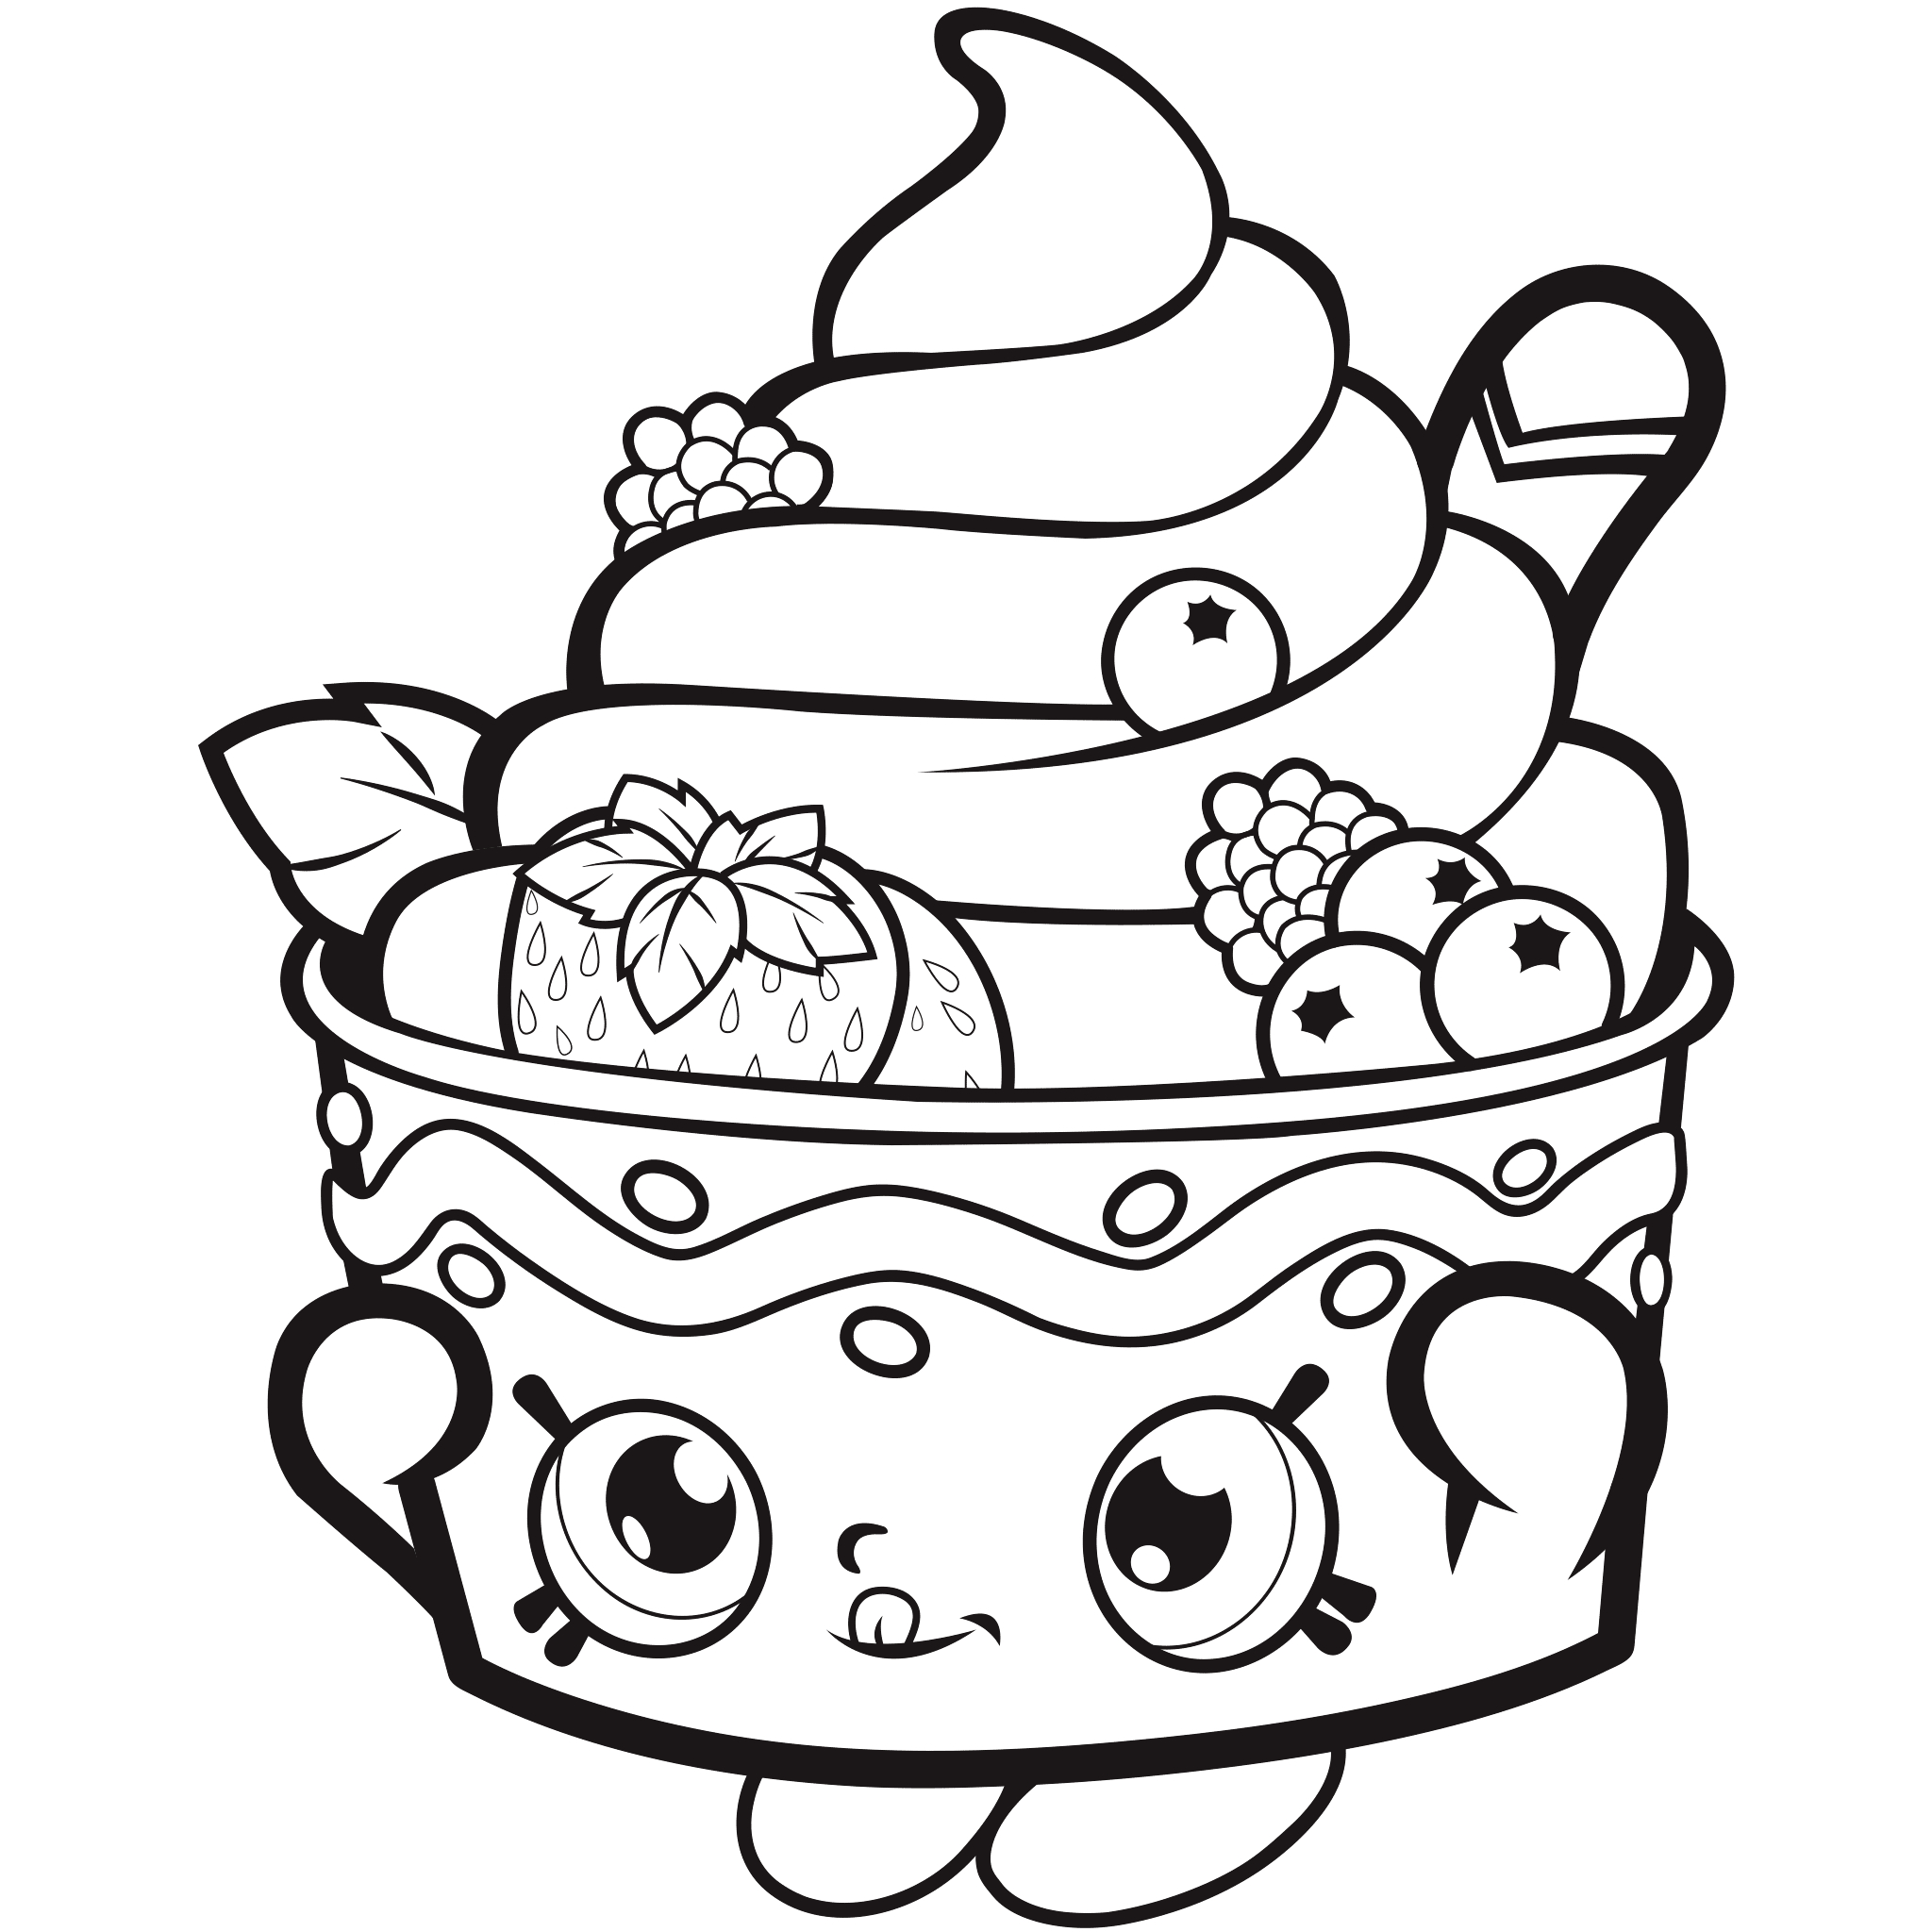 Coloring Pages : Free Shopkinsoloring Pages For Kids Picture Ideas - Shopkins Coloring Pages Free Printable